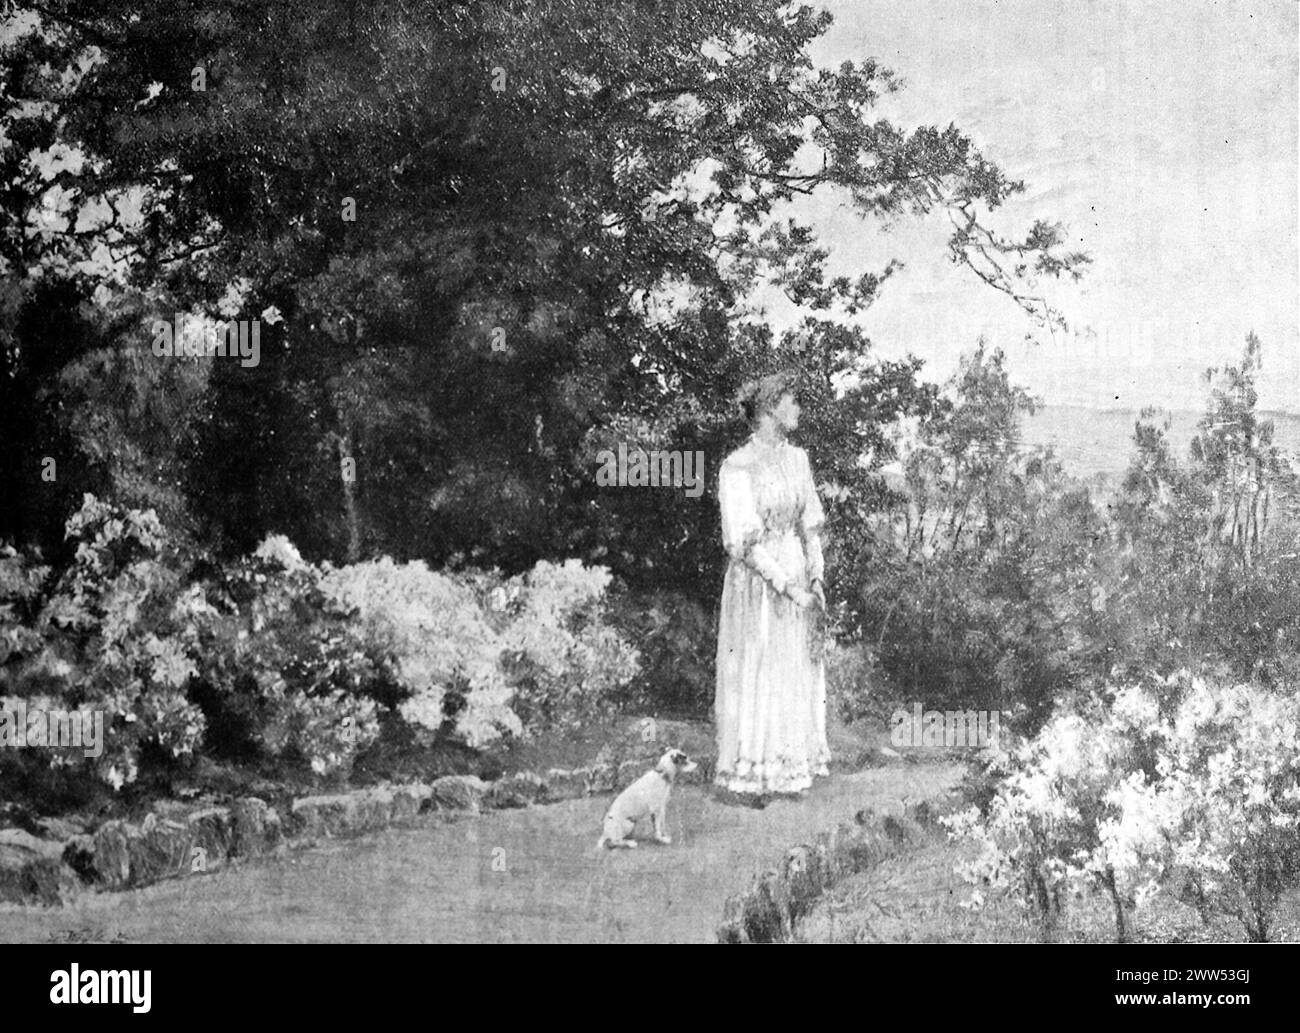 Avont Thae Hills, a lady on a footpath in a garden, a small dog seated beside her, from an unattributed painting. Black and white. Photograph taken from a magazine originally published in 1899. Stock Photo